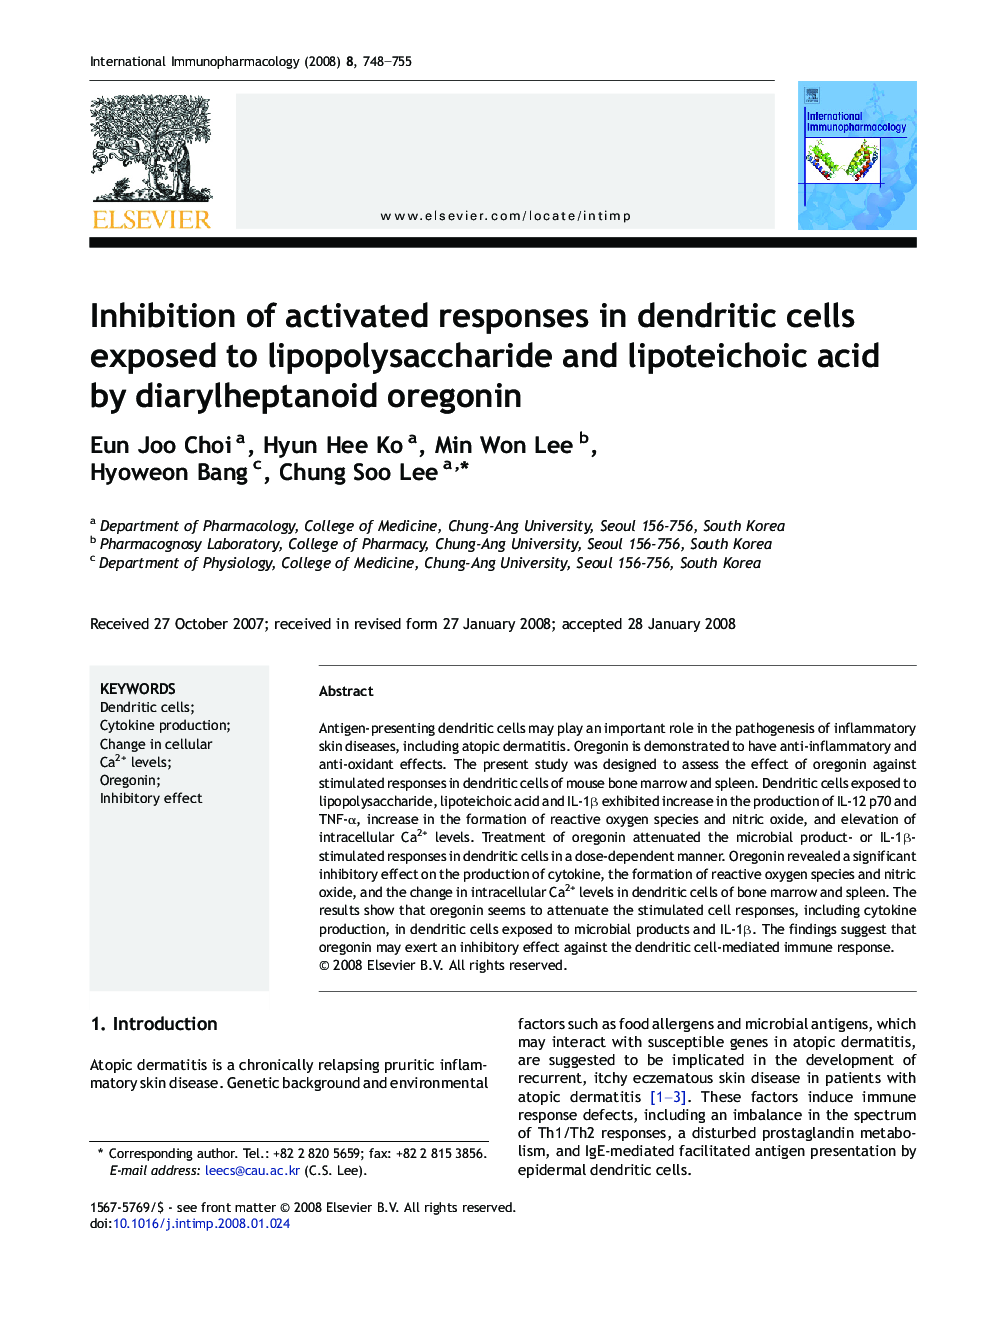 Inhibition of activated responses in dendritic cells exposed to lipopolysaccharide and lipoteichoic acid by diarylheptanoid oregonin